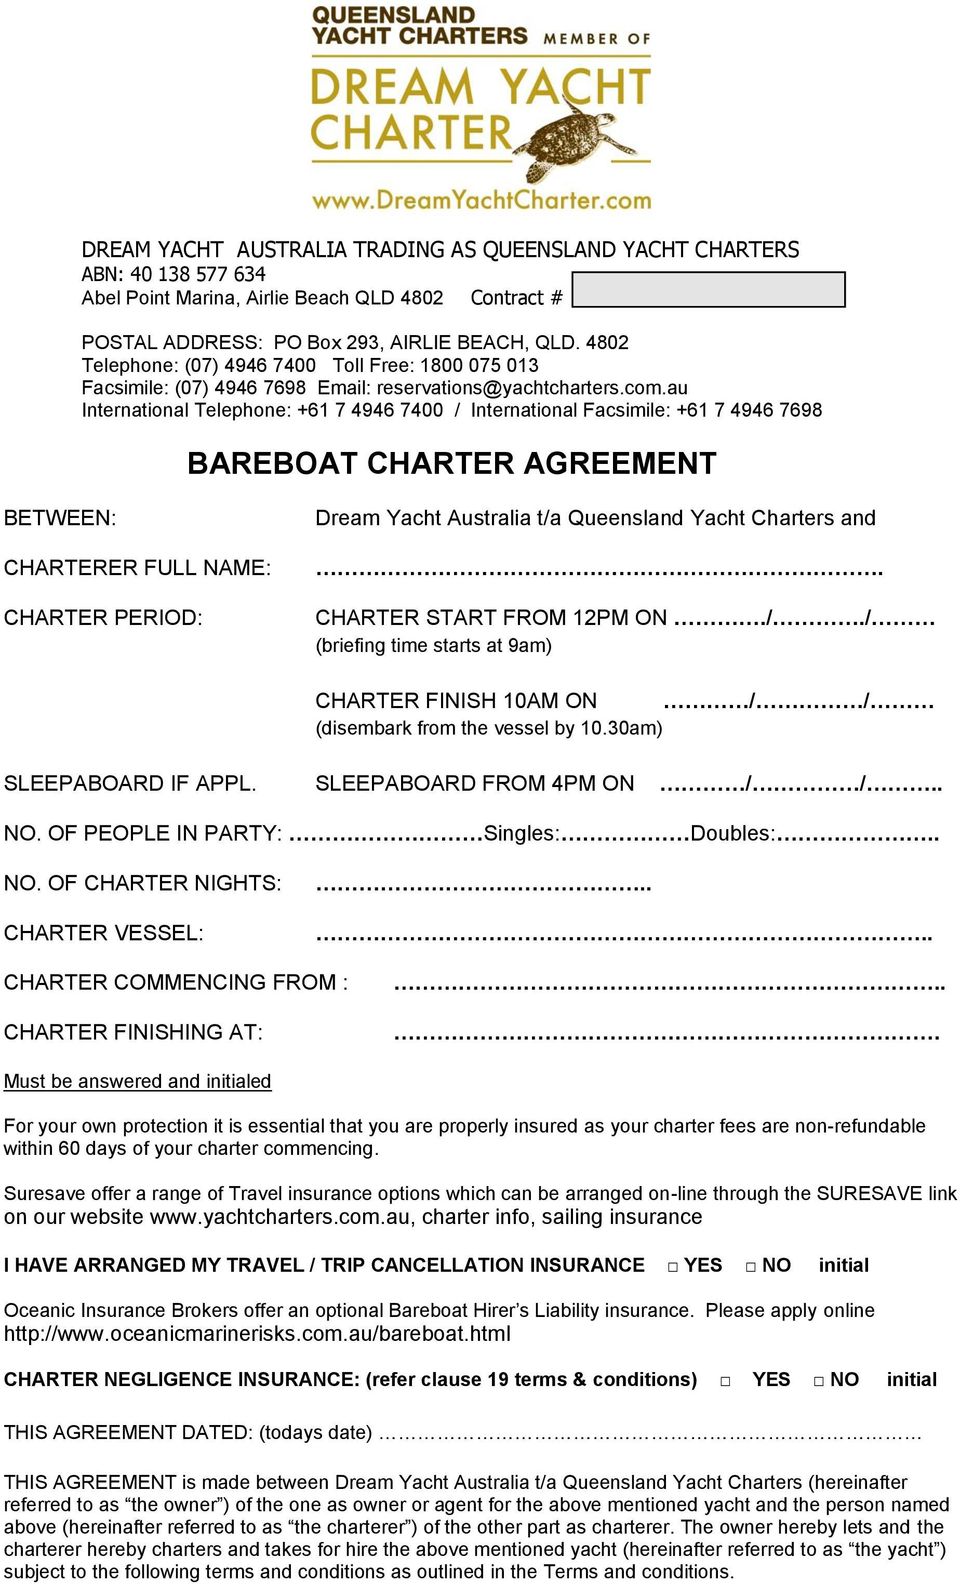 BAREBOAT CHARTER AGREEMENT - PDF Free Download With Regard To yacht charter agreement template